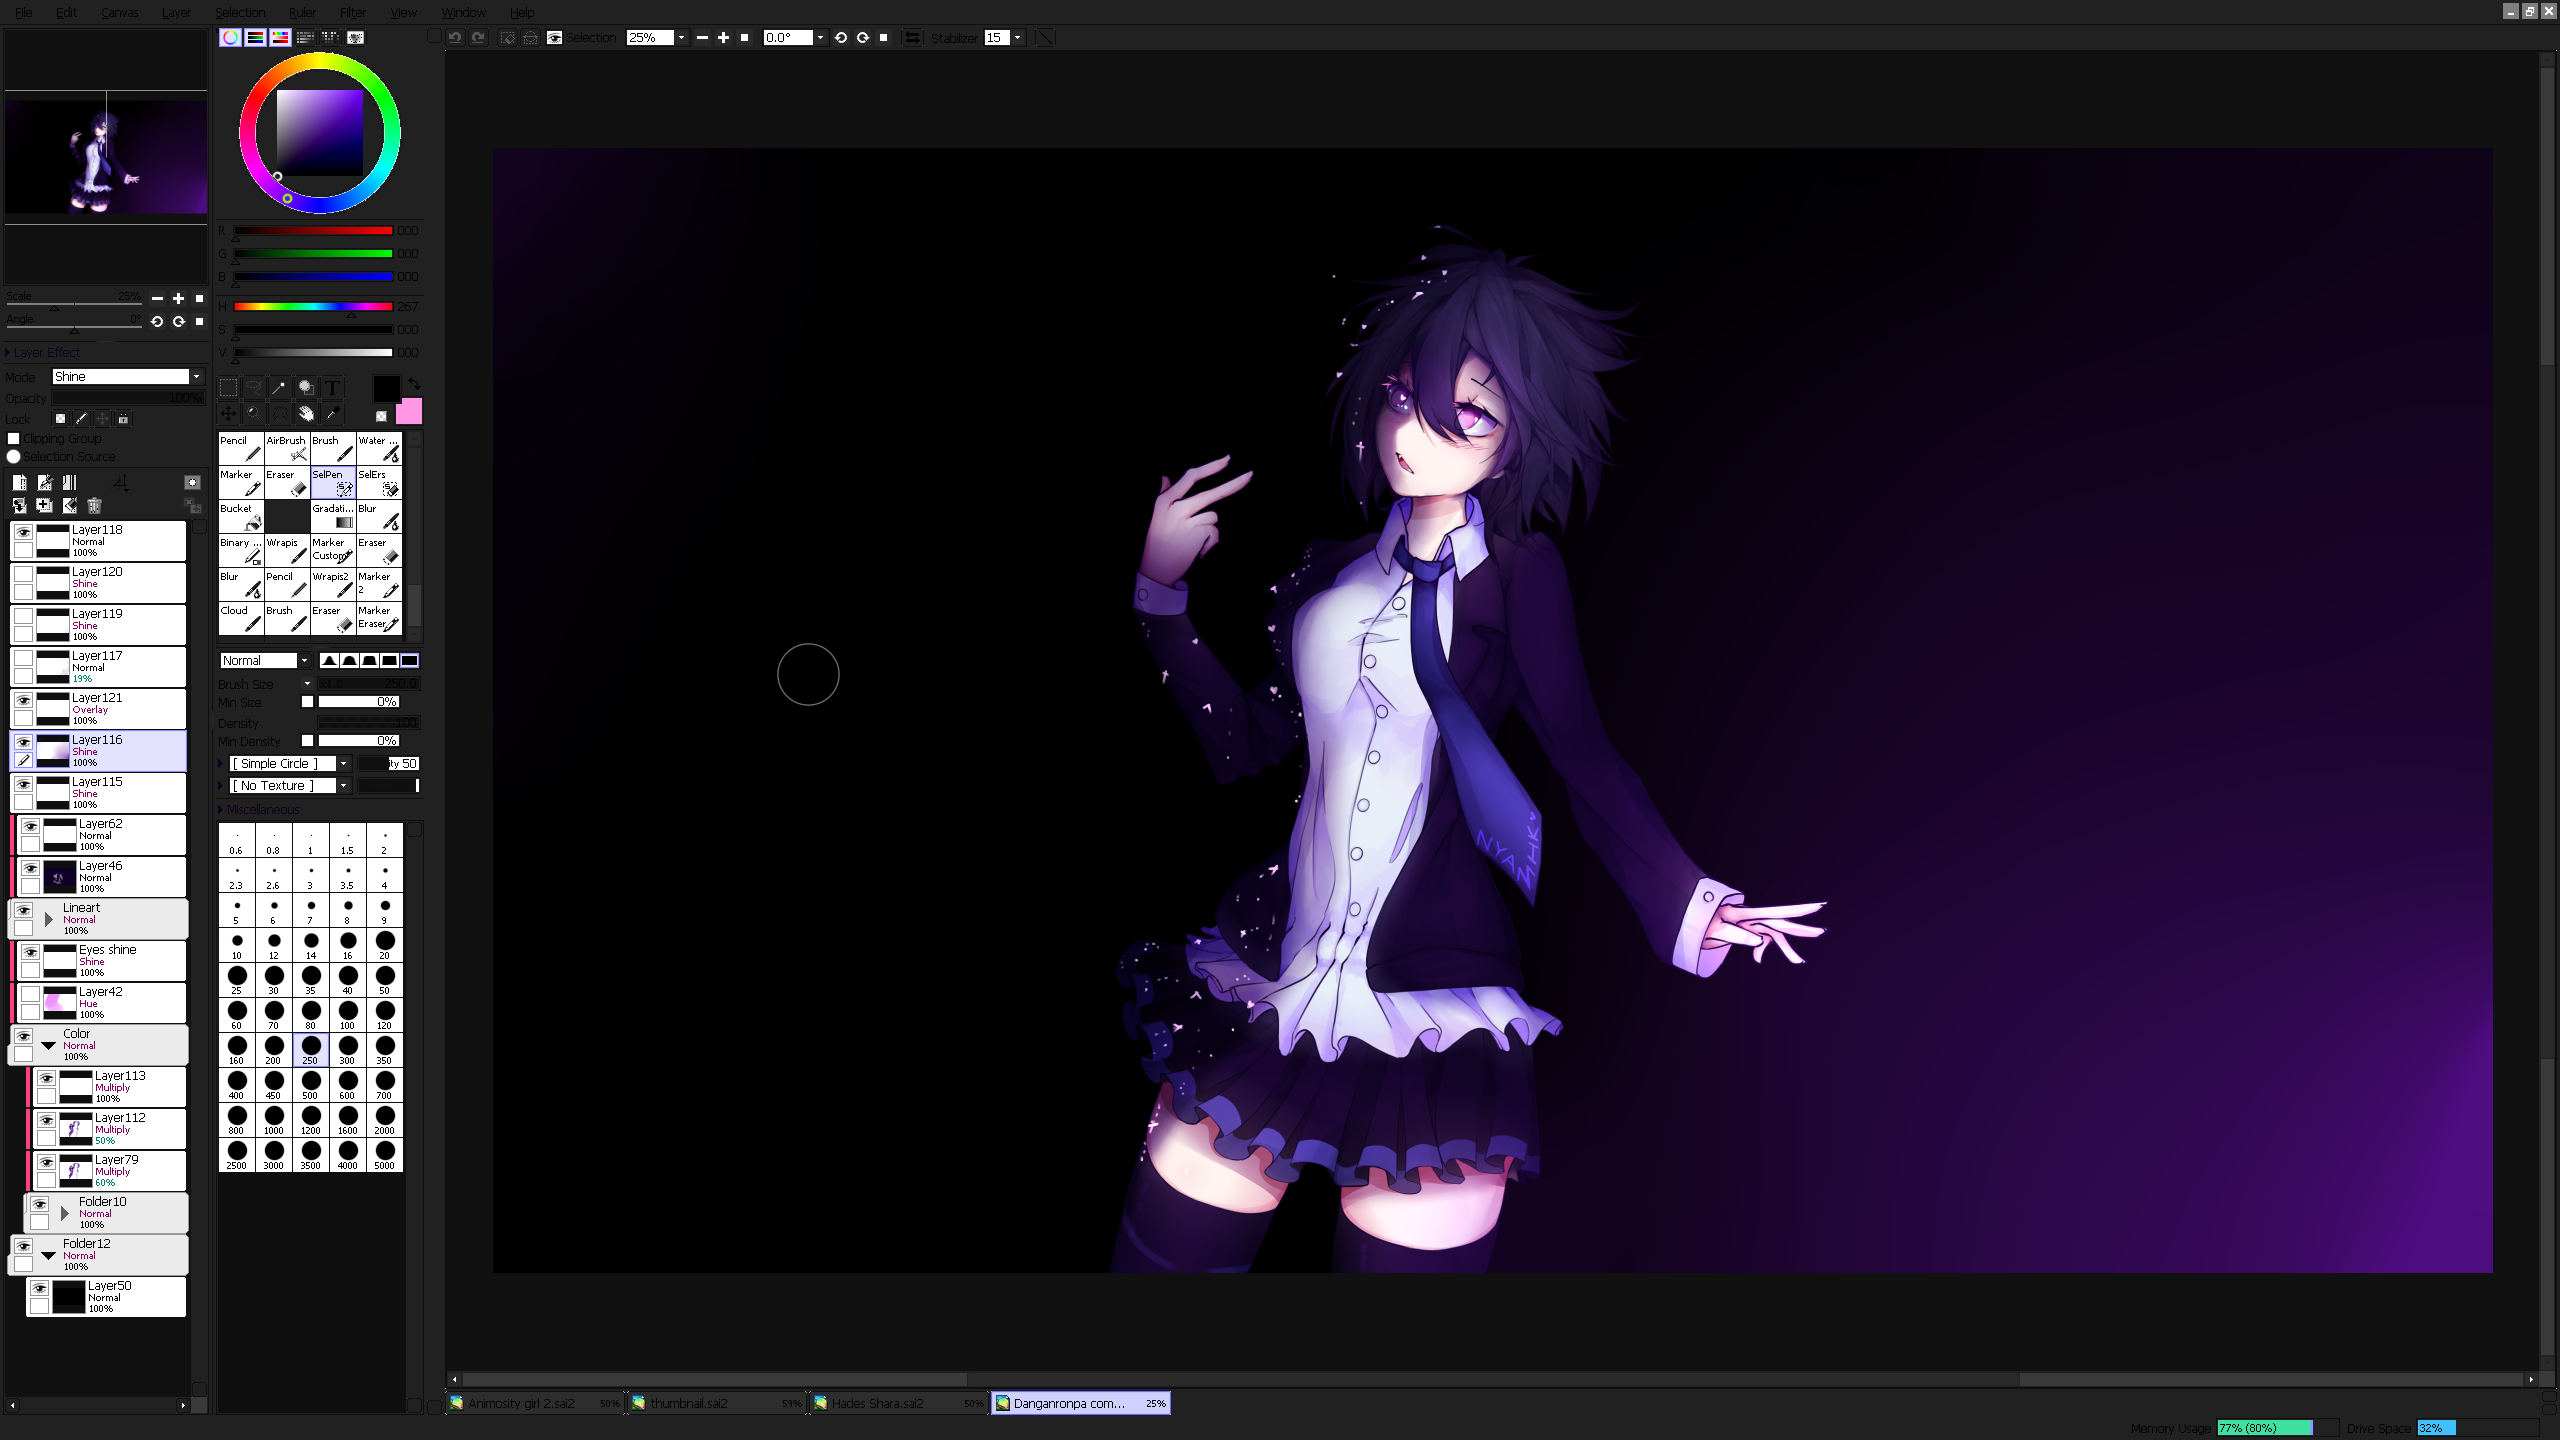 Dark Mode In Paint Tool Sai2 + How To Customize It By Nyamhk On Deviantart